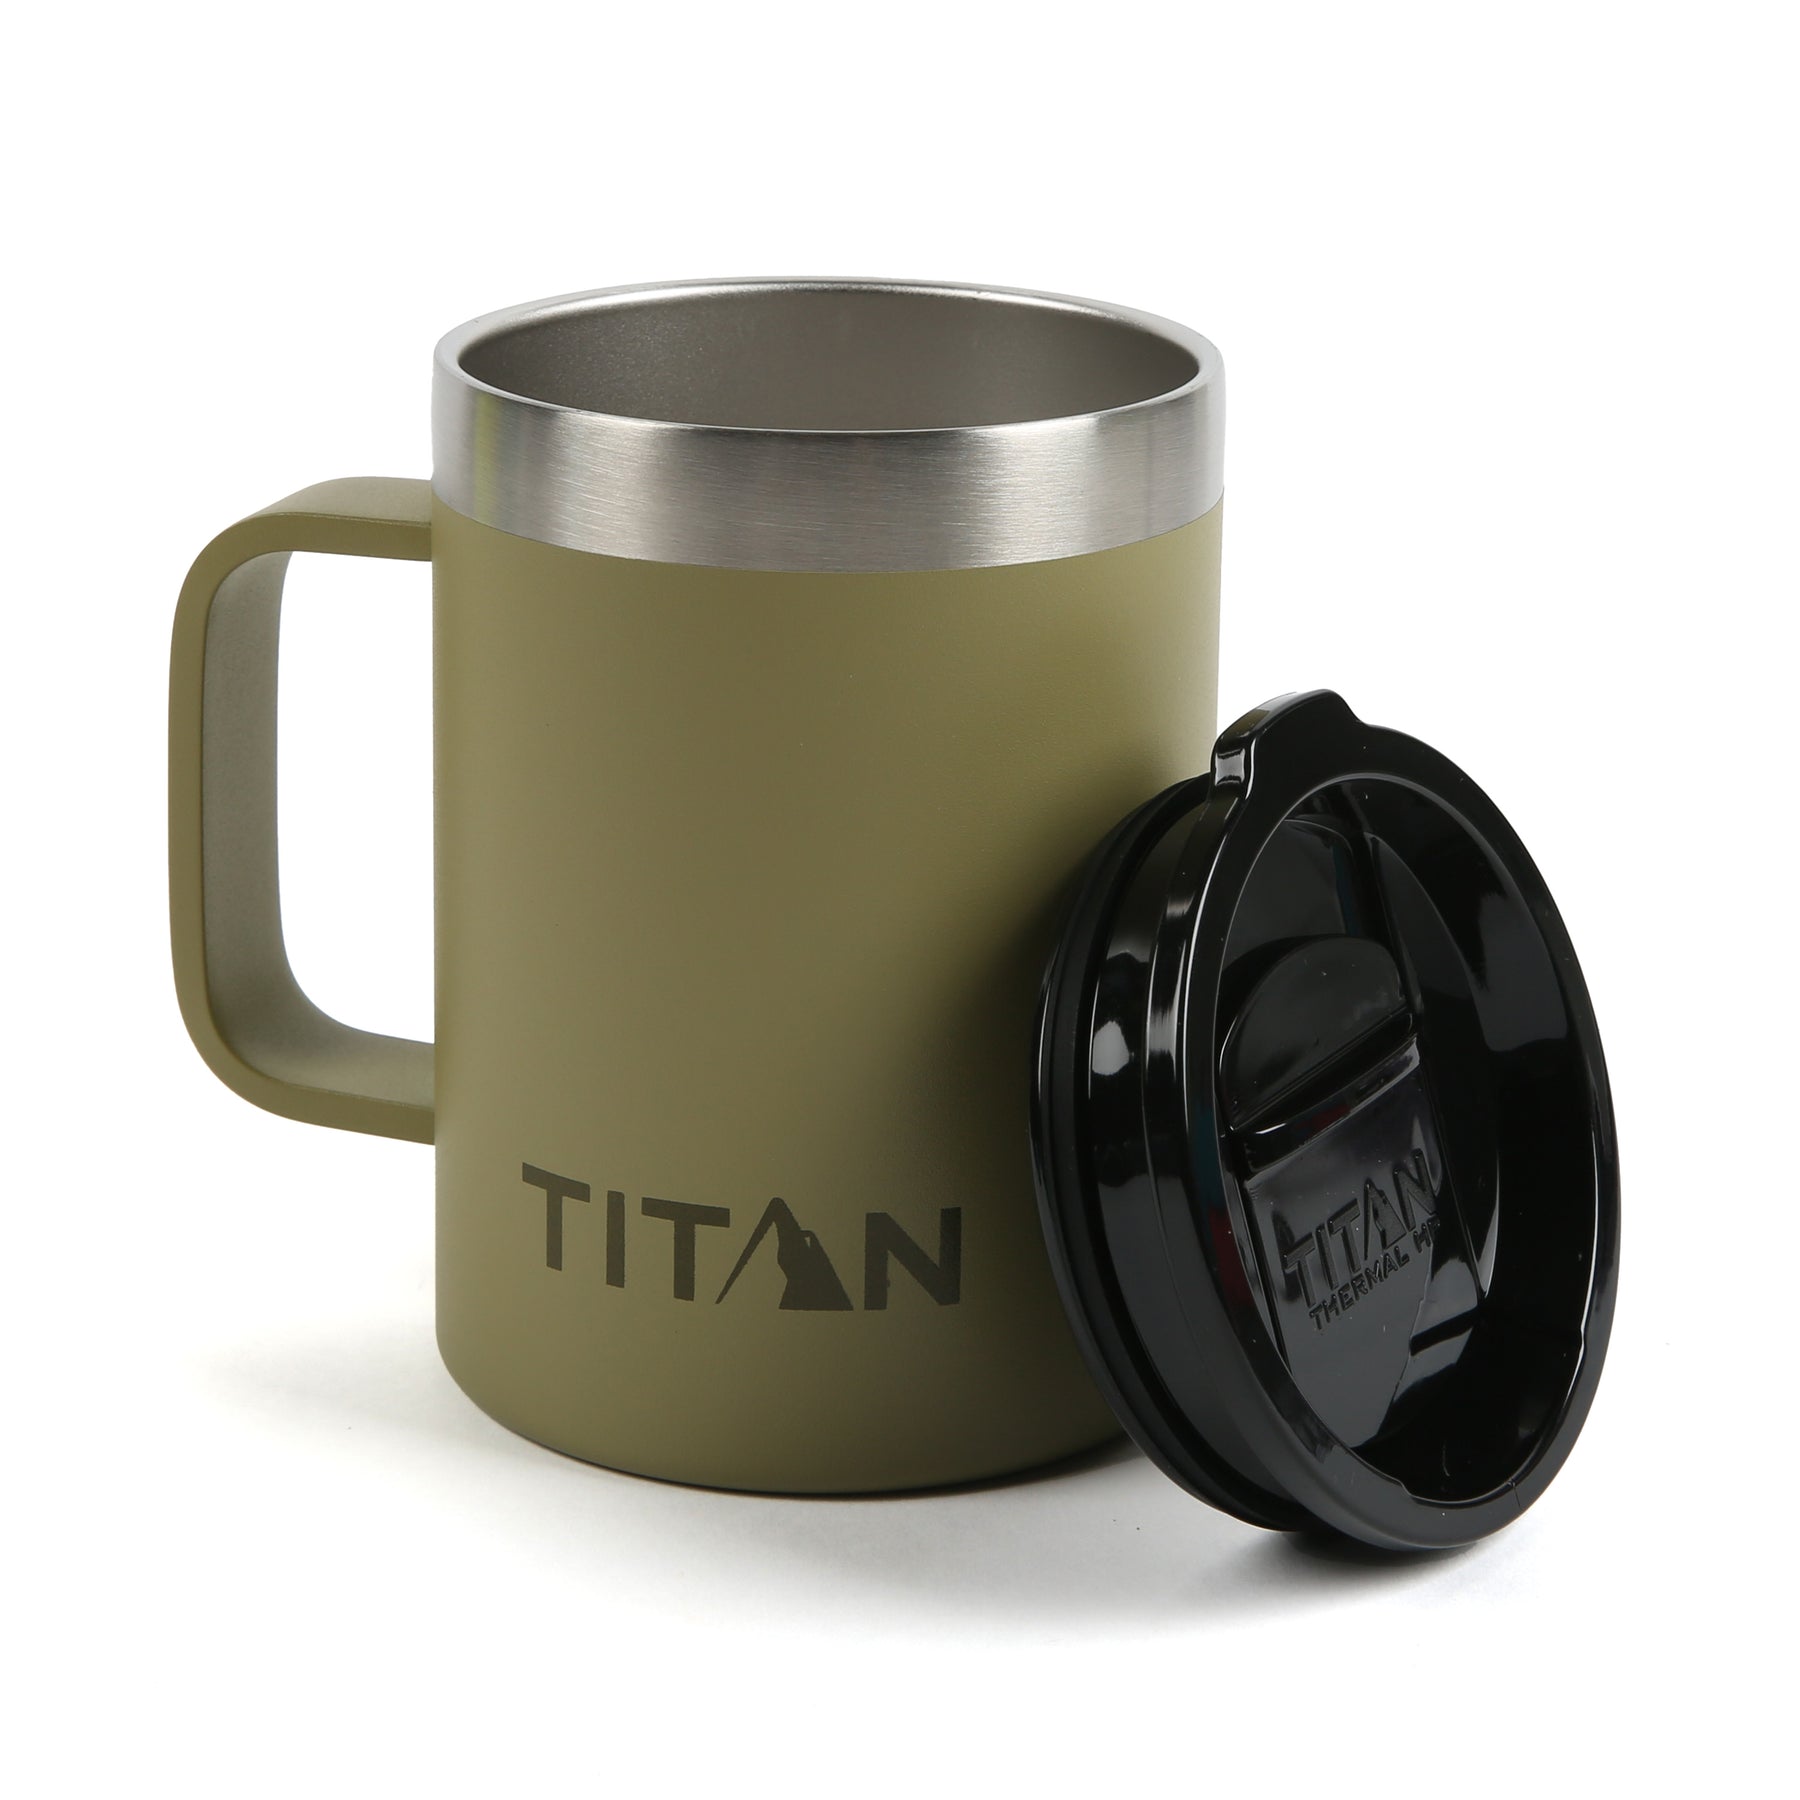 20 Oz. Stainless Steel Tumbler With Microban® Infused Lid*